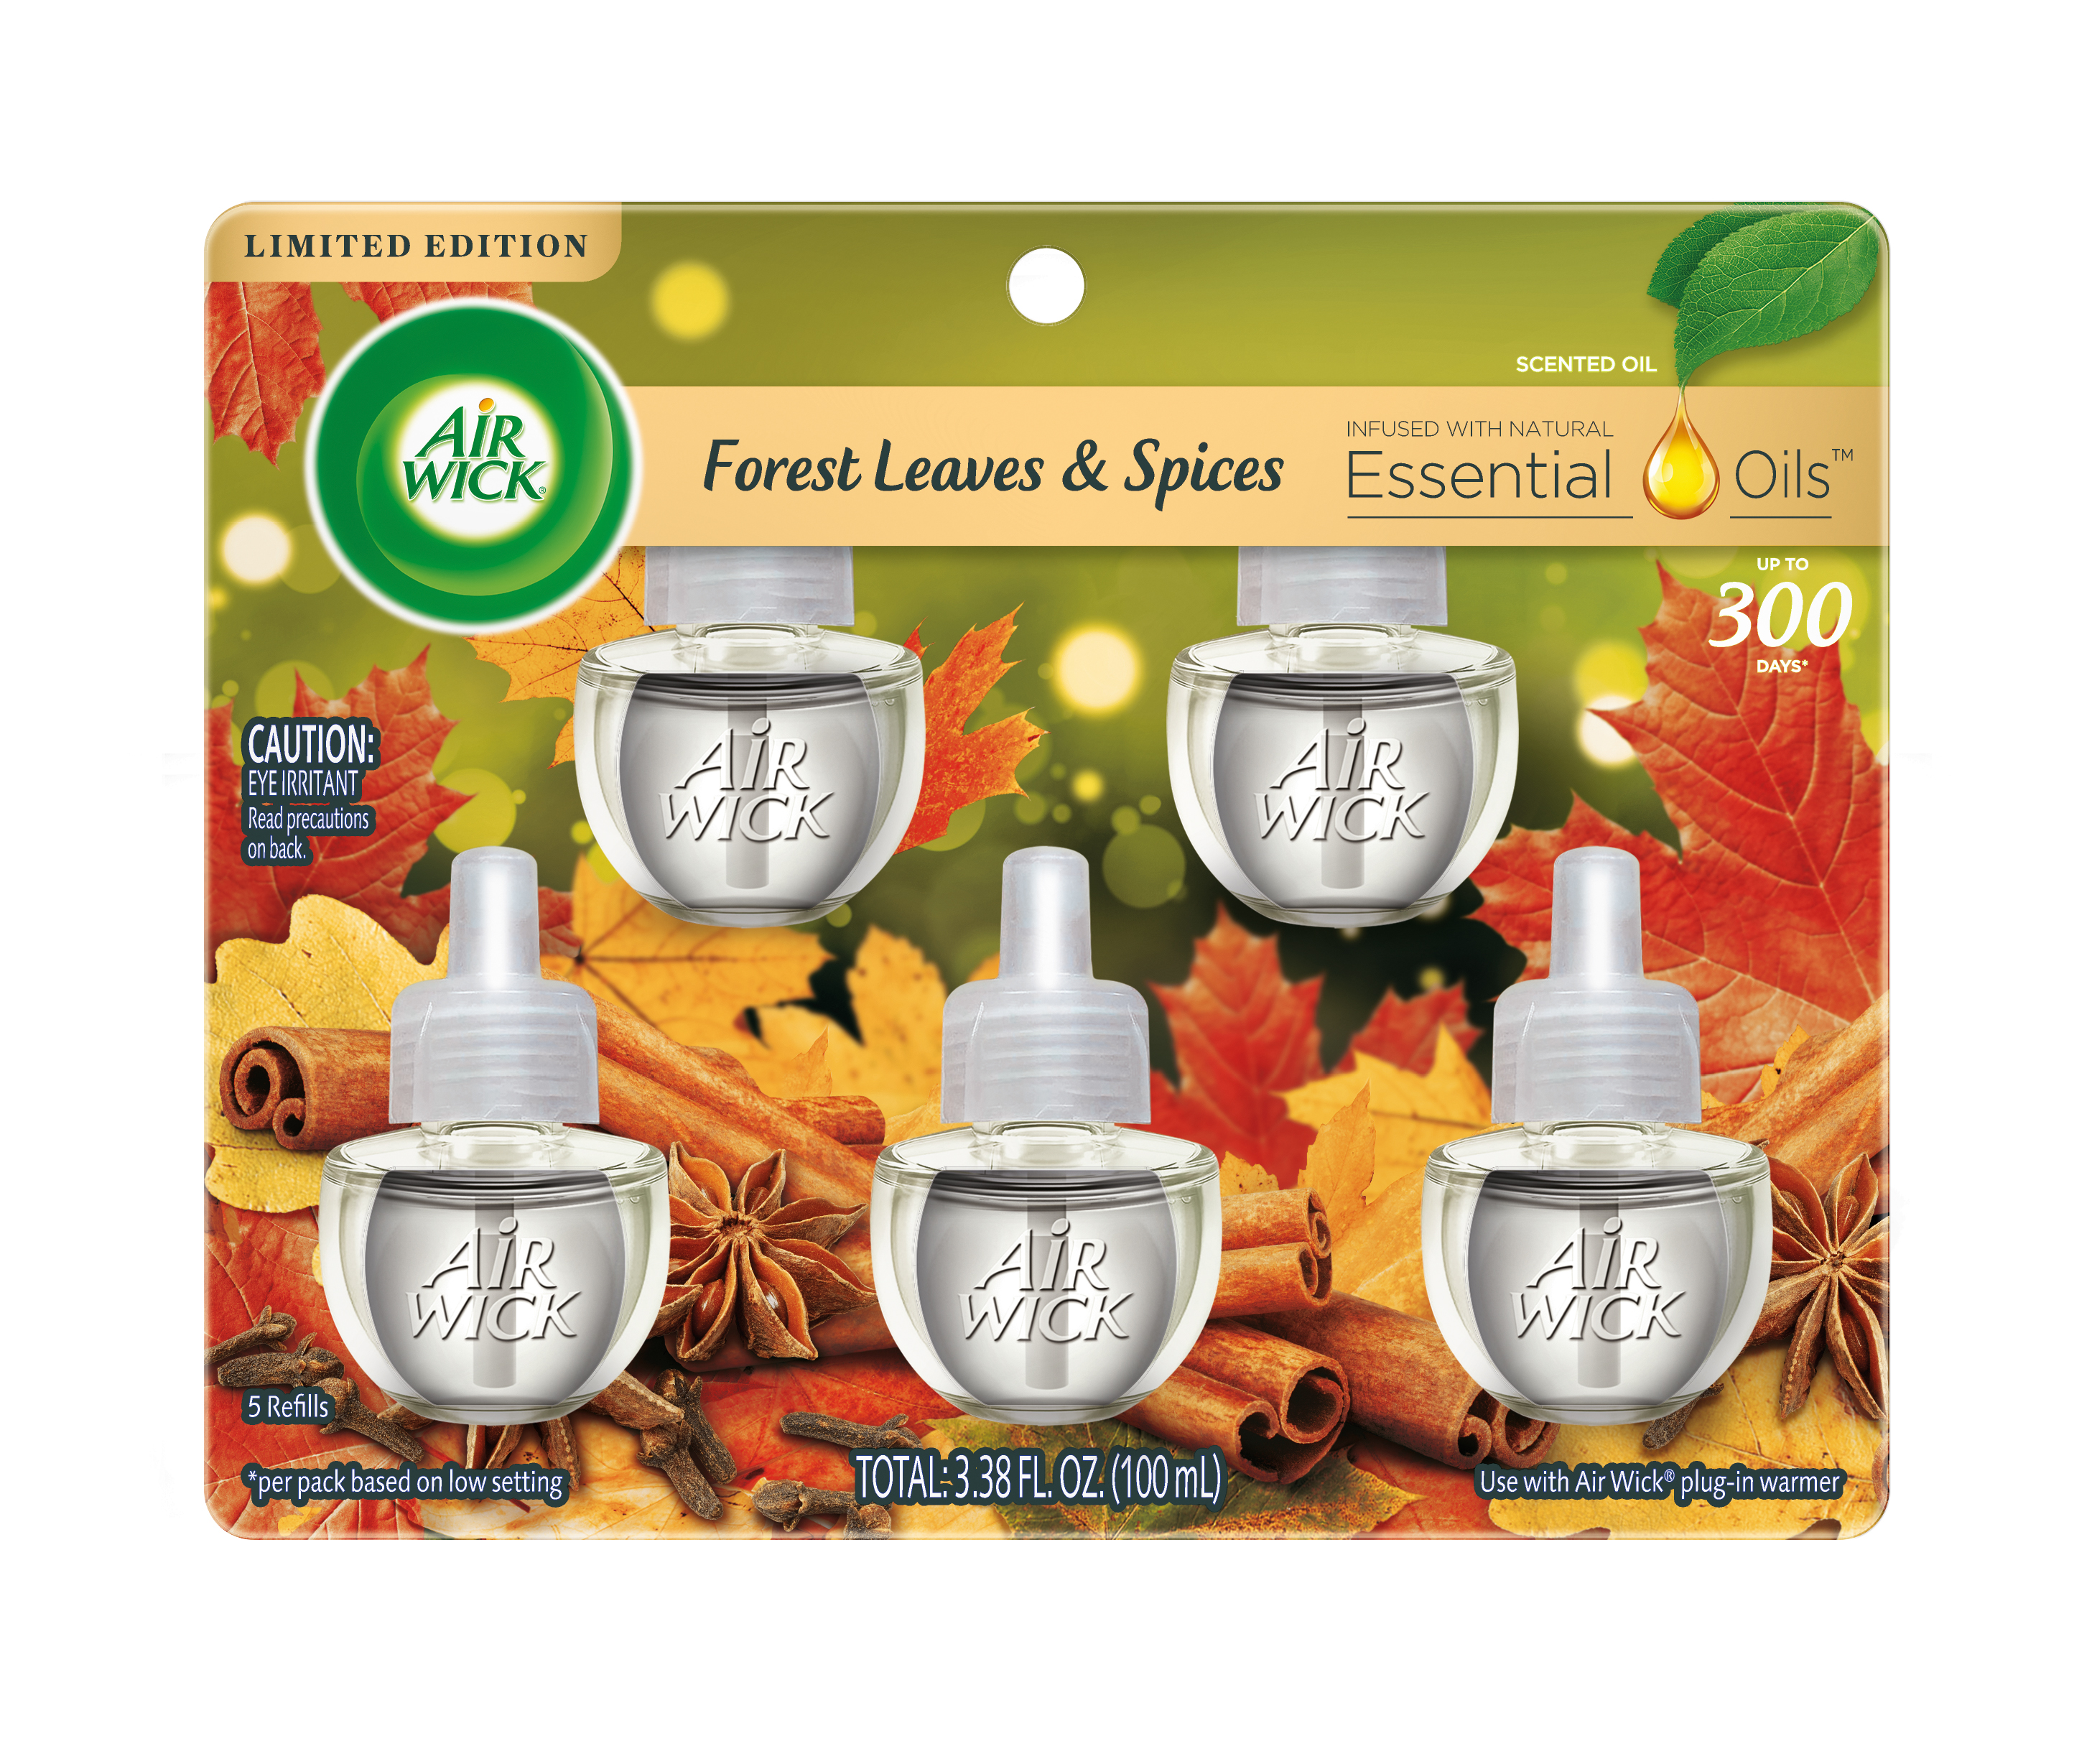 AIR WICK Scented Oil  Forest Spice  Leaves